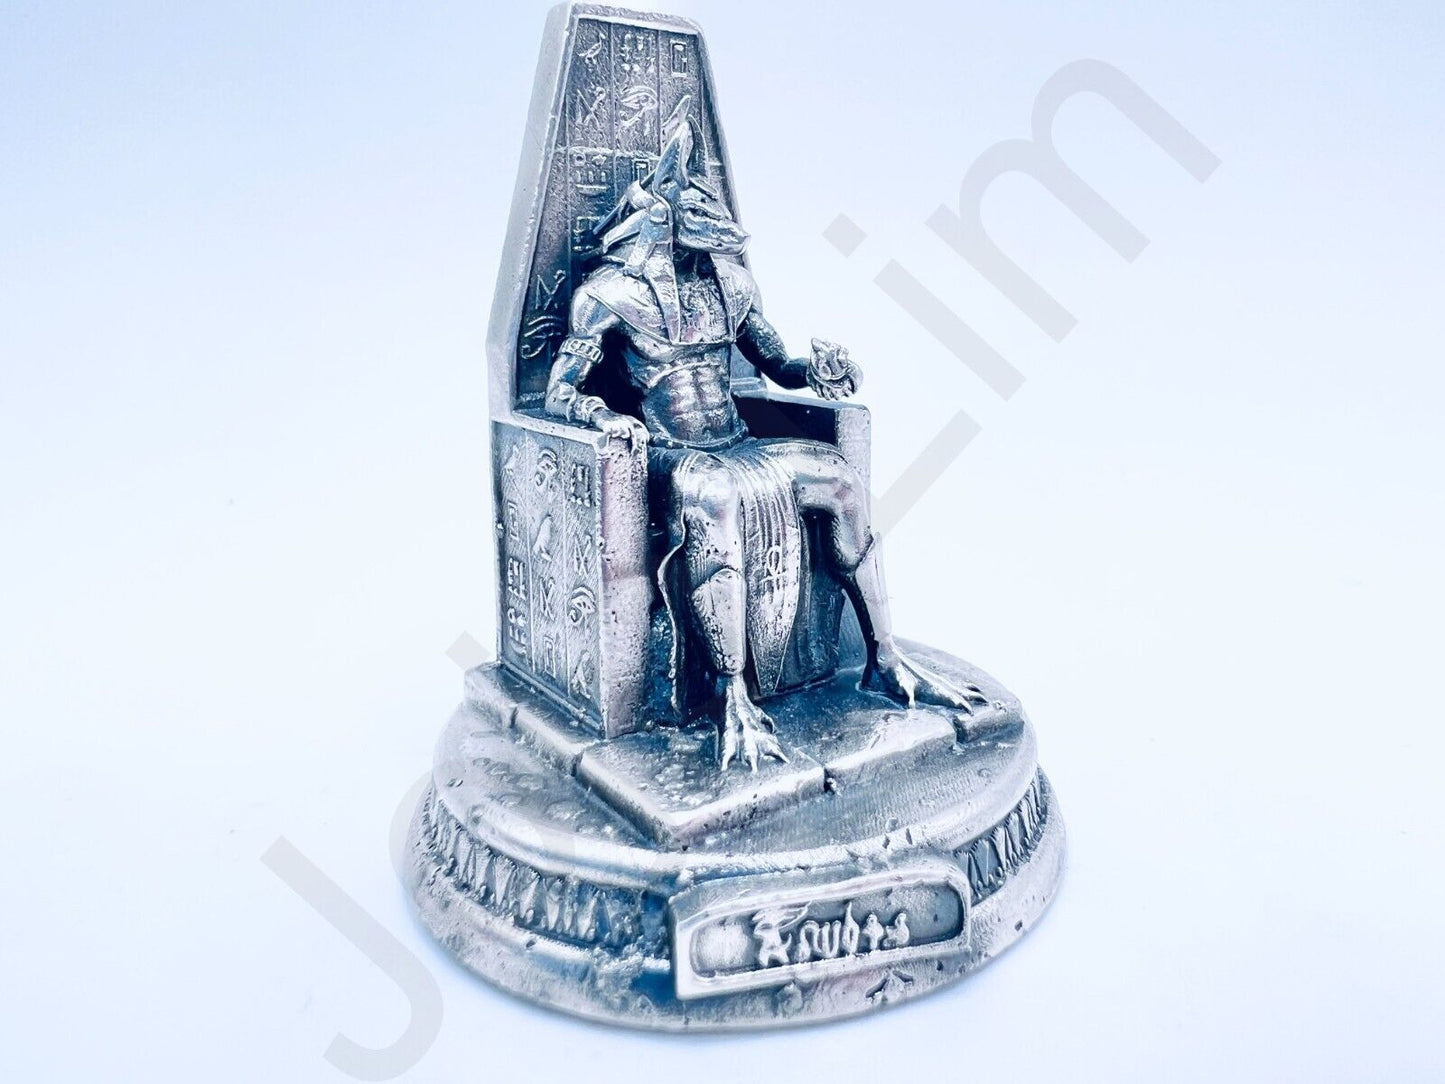 3 oz Hand Poured 999 Silver Bar Statue "Anubis" by The Gold Spartan